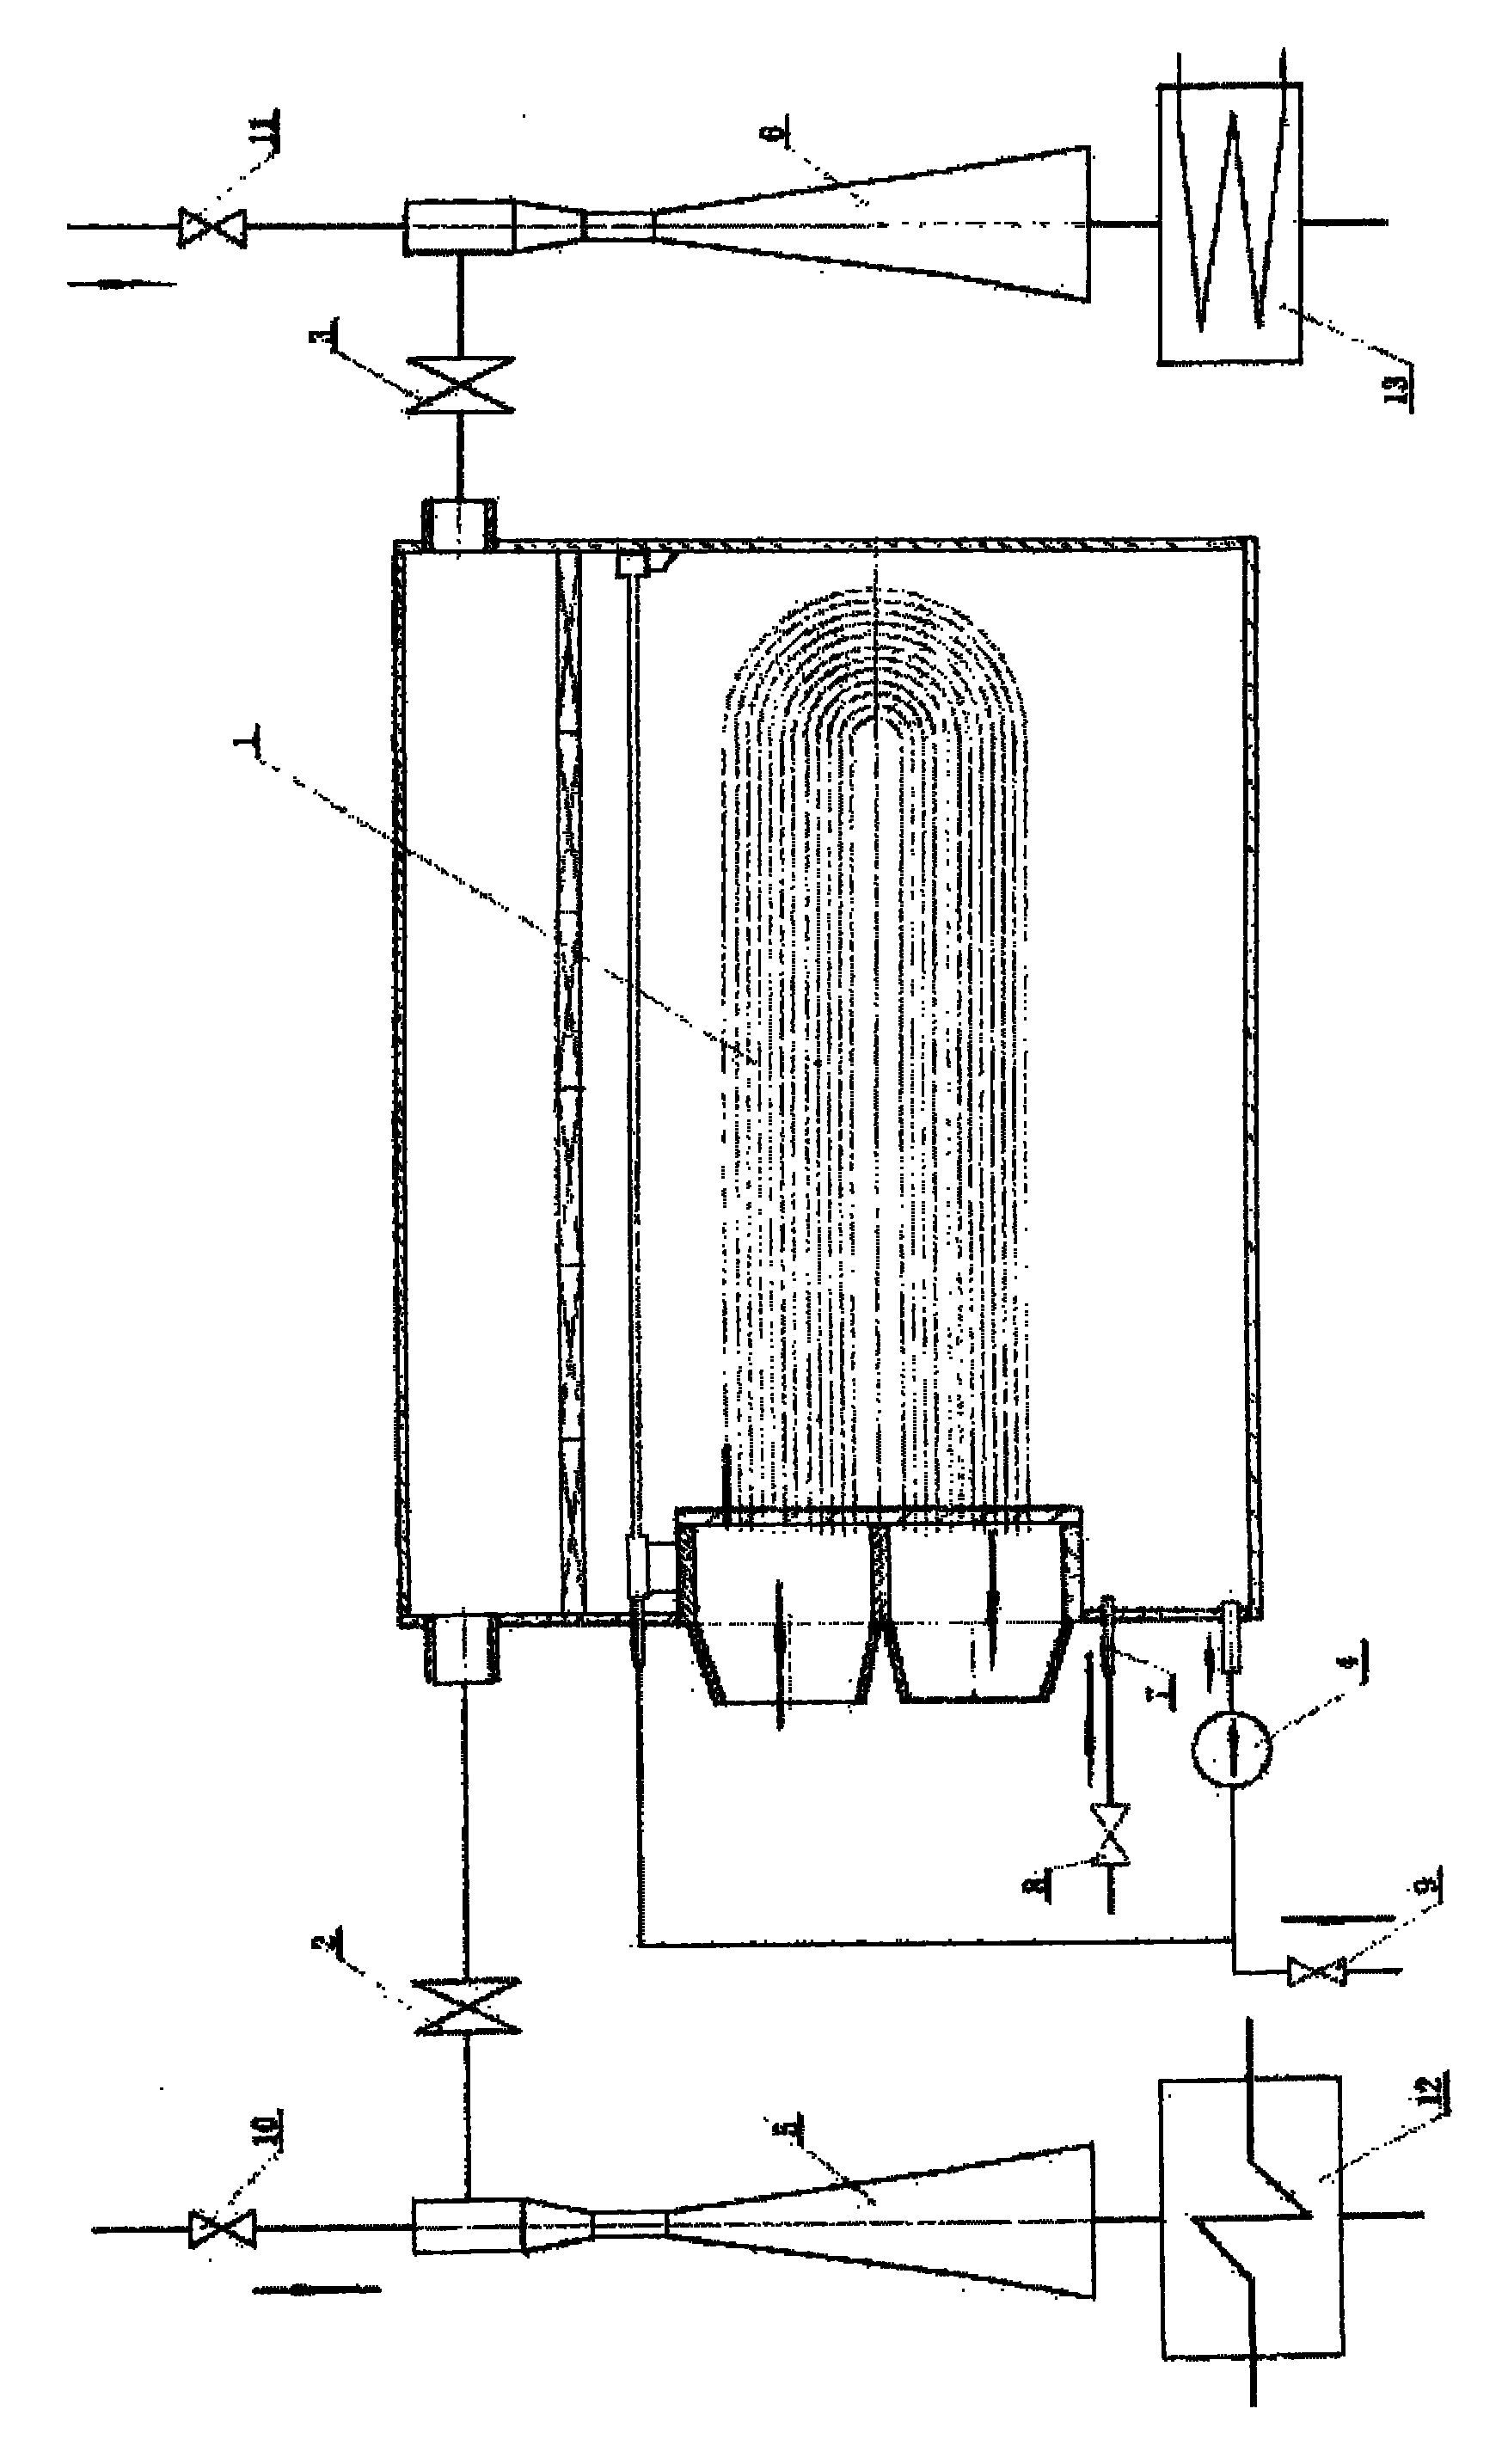 Closed water cooling system being capable of producing condensed water